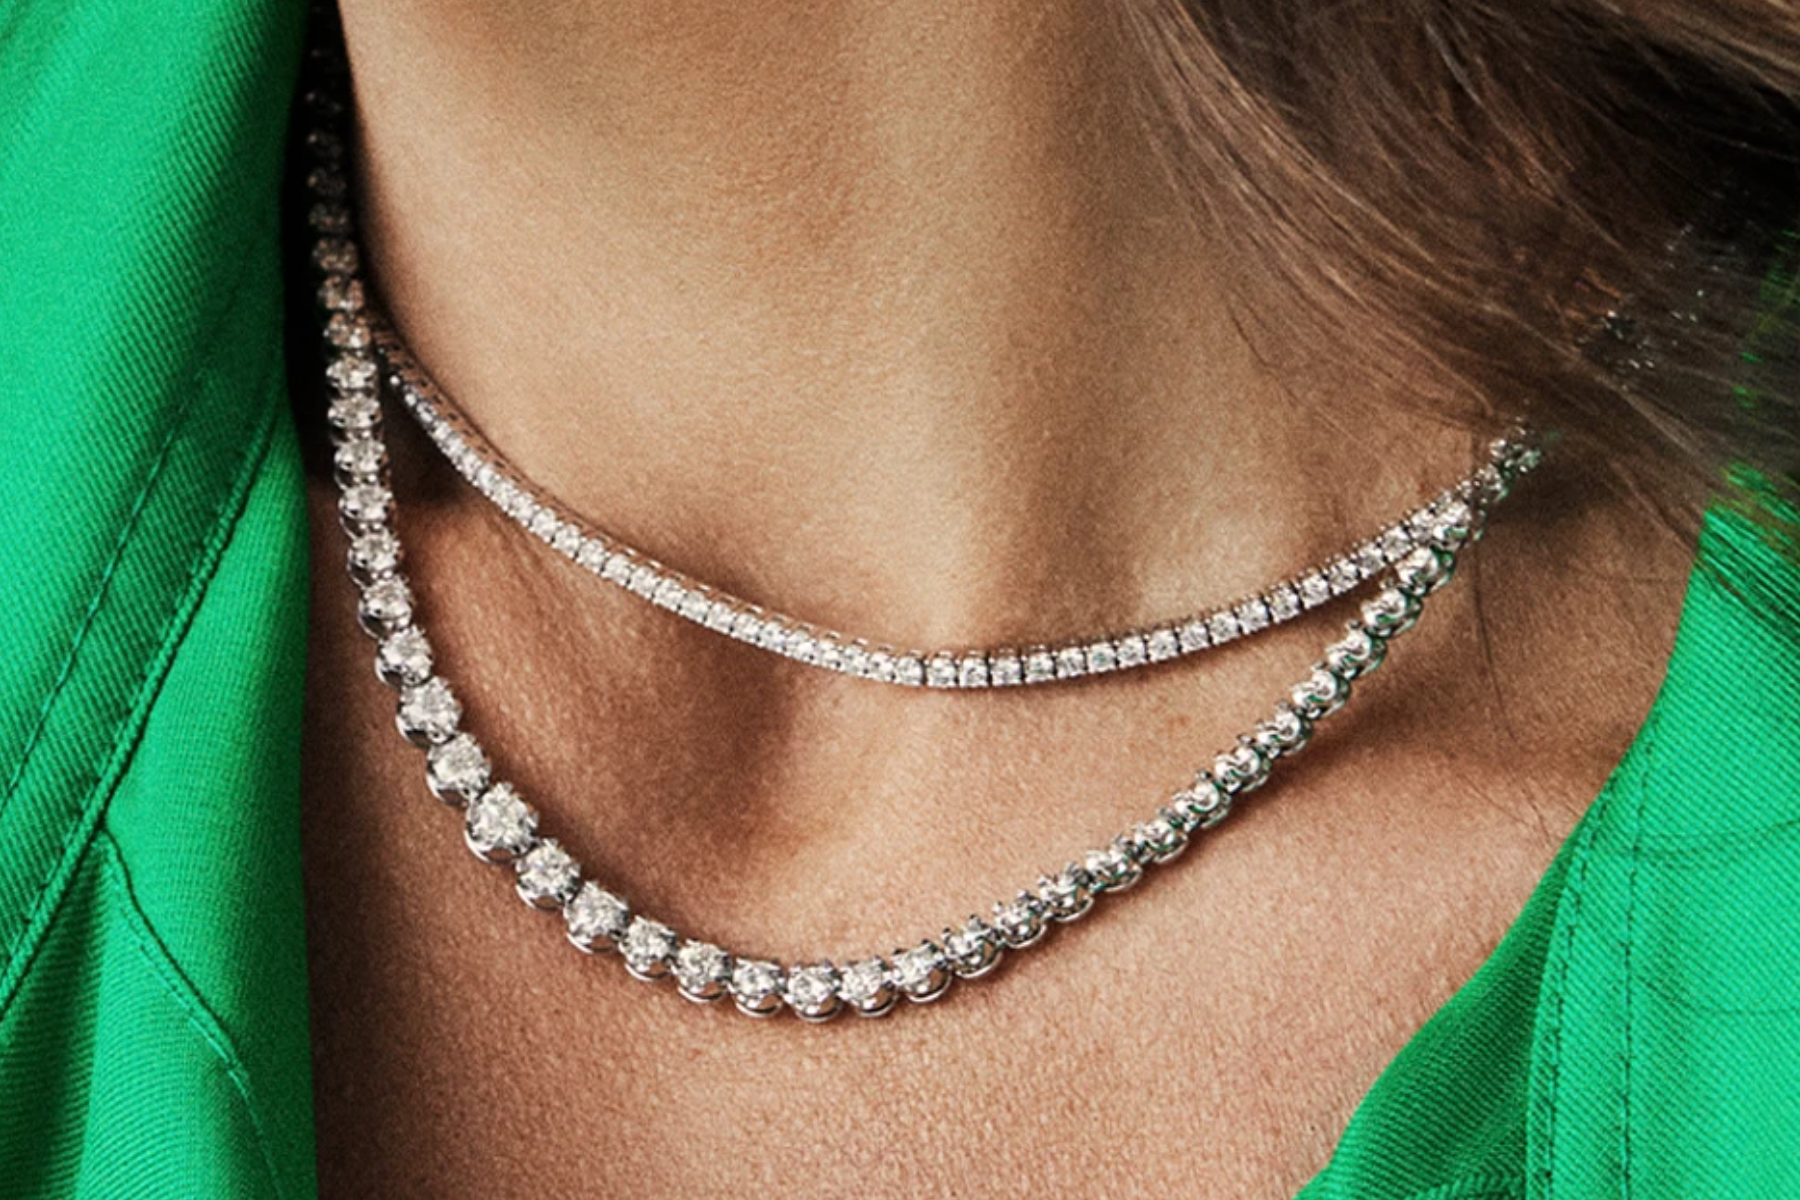 Elegant Diamond Necklaces For Formal Occasions - Dazzle In Style